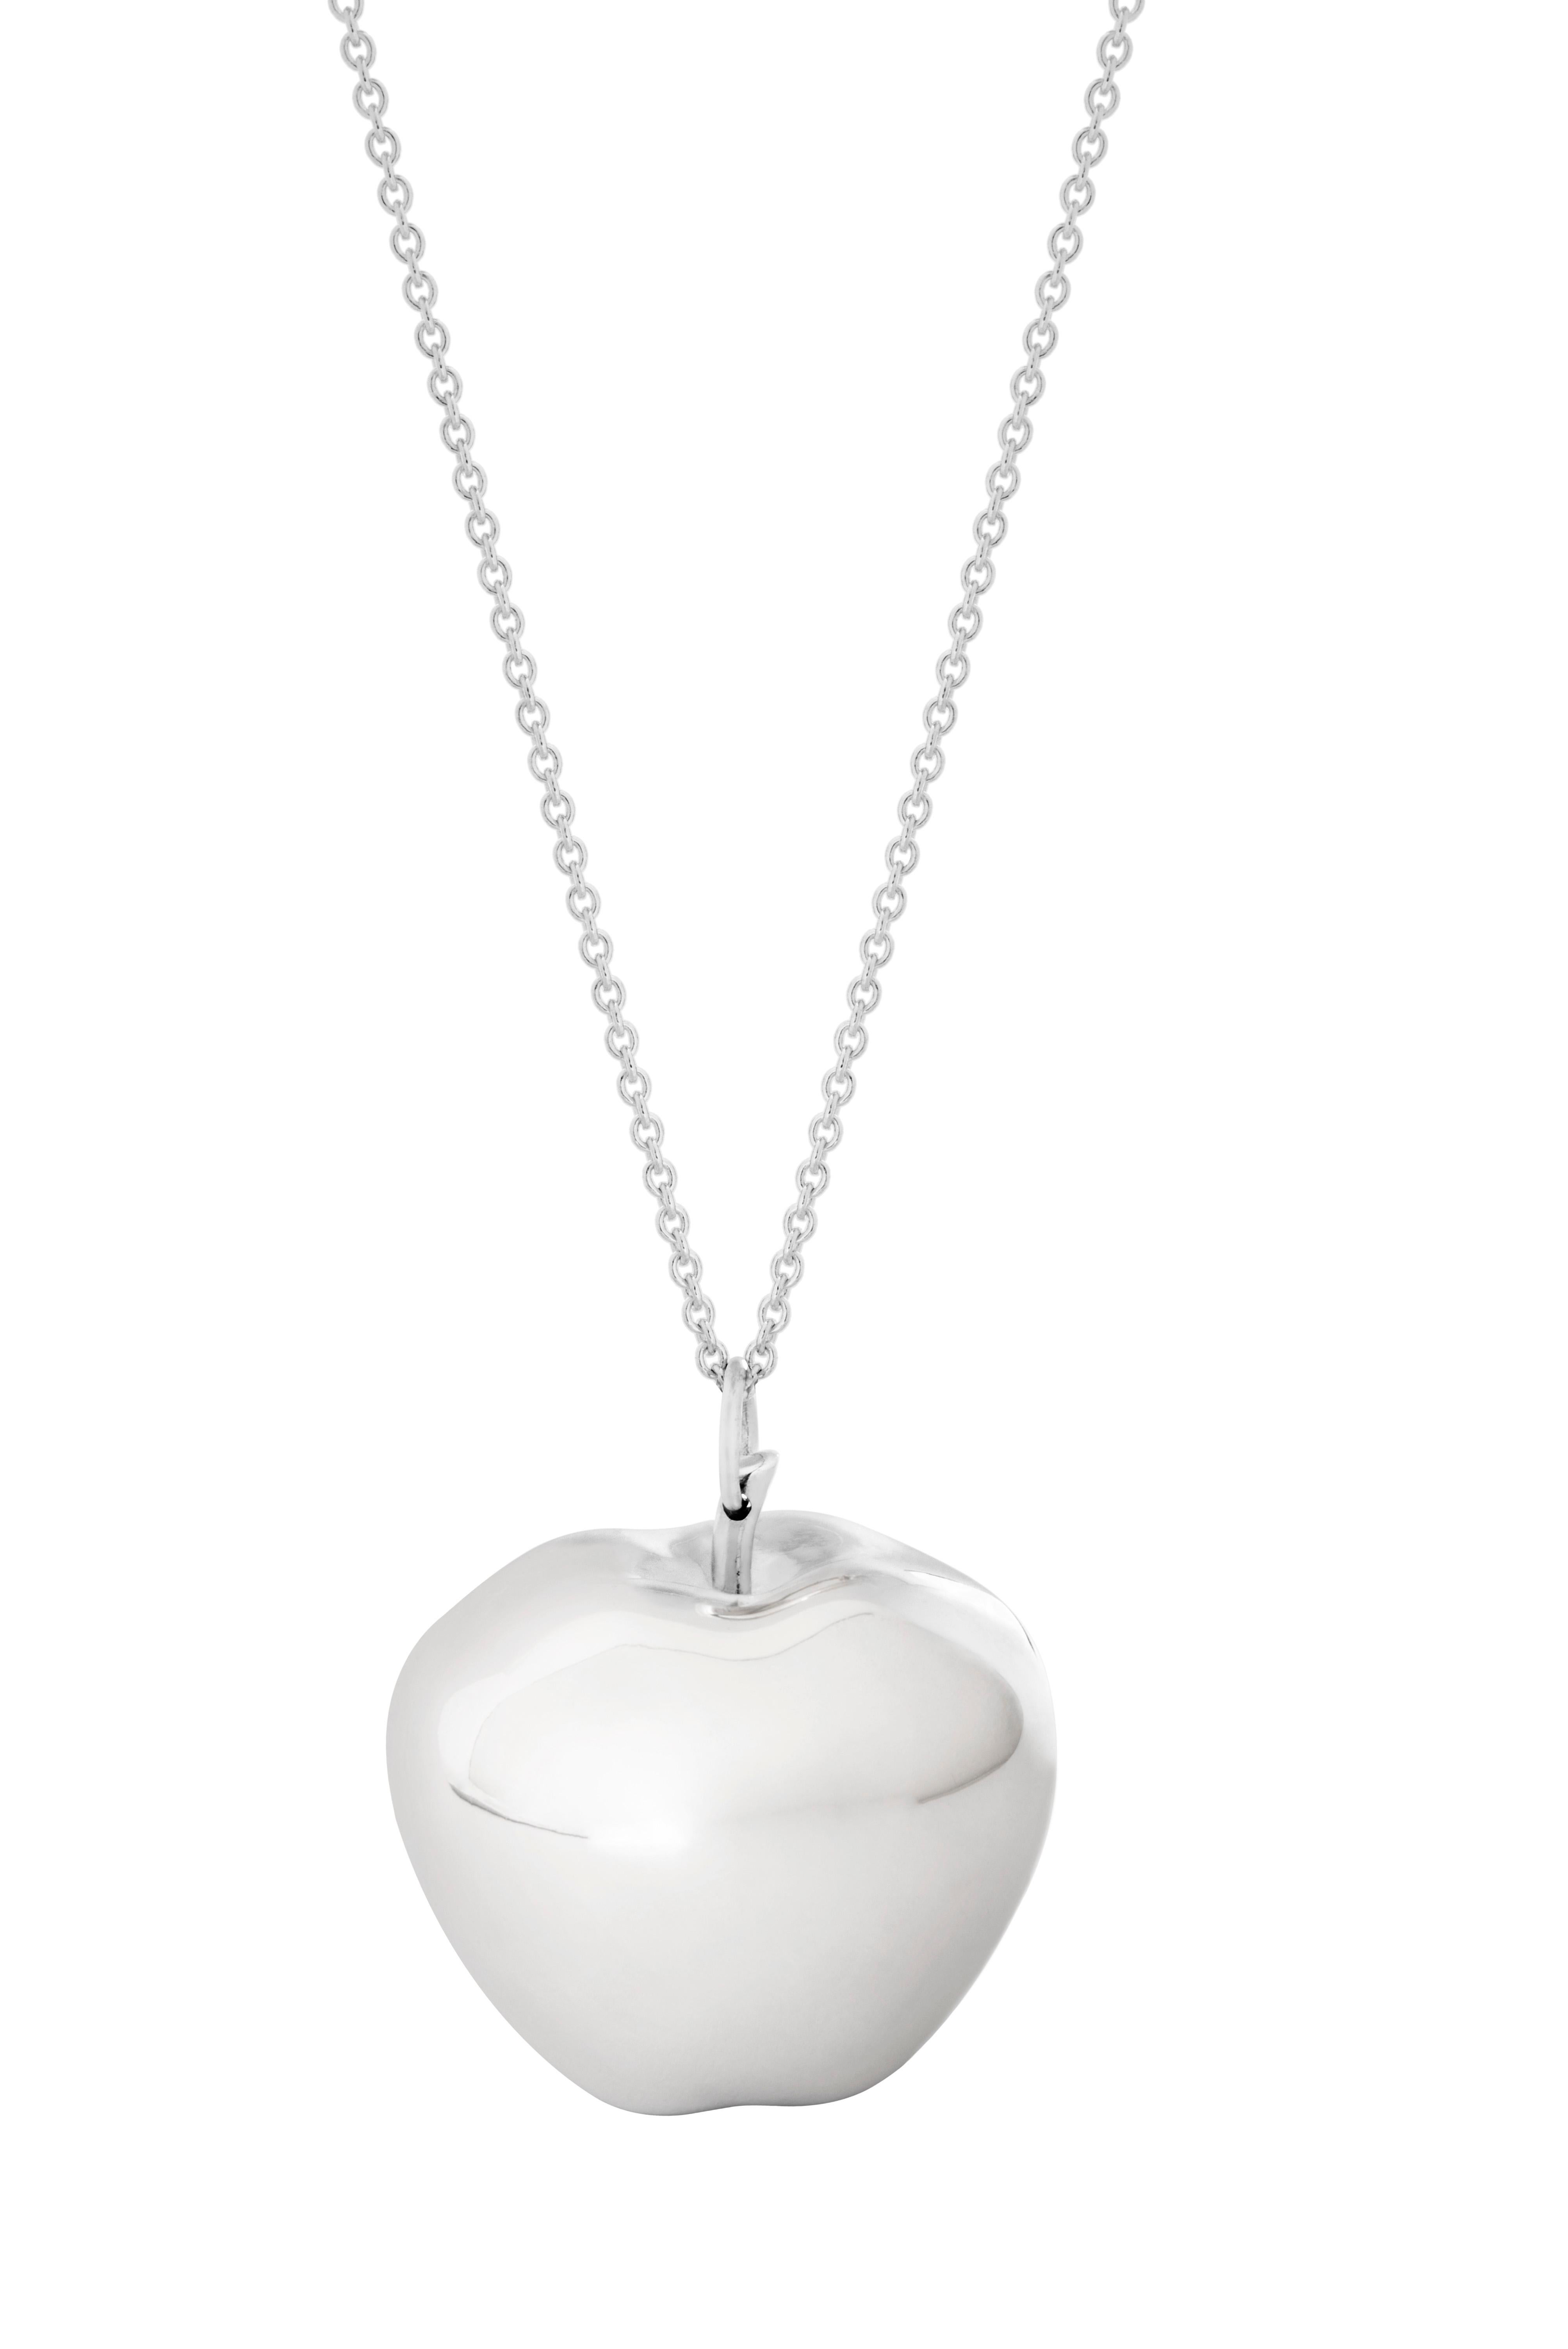 Misui Fruitful Apple Pendant in Sterling Silver In New Condition For Sale In Barcelona, ES